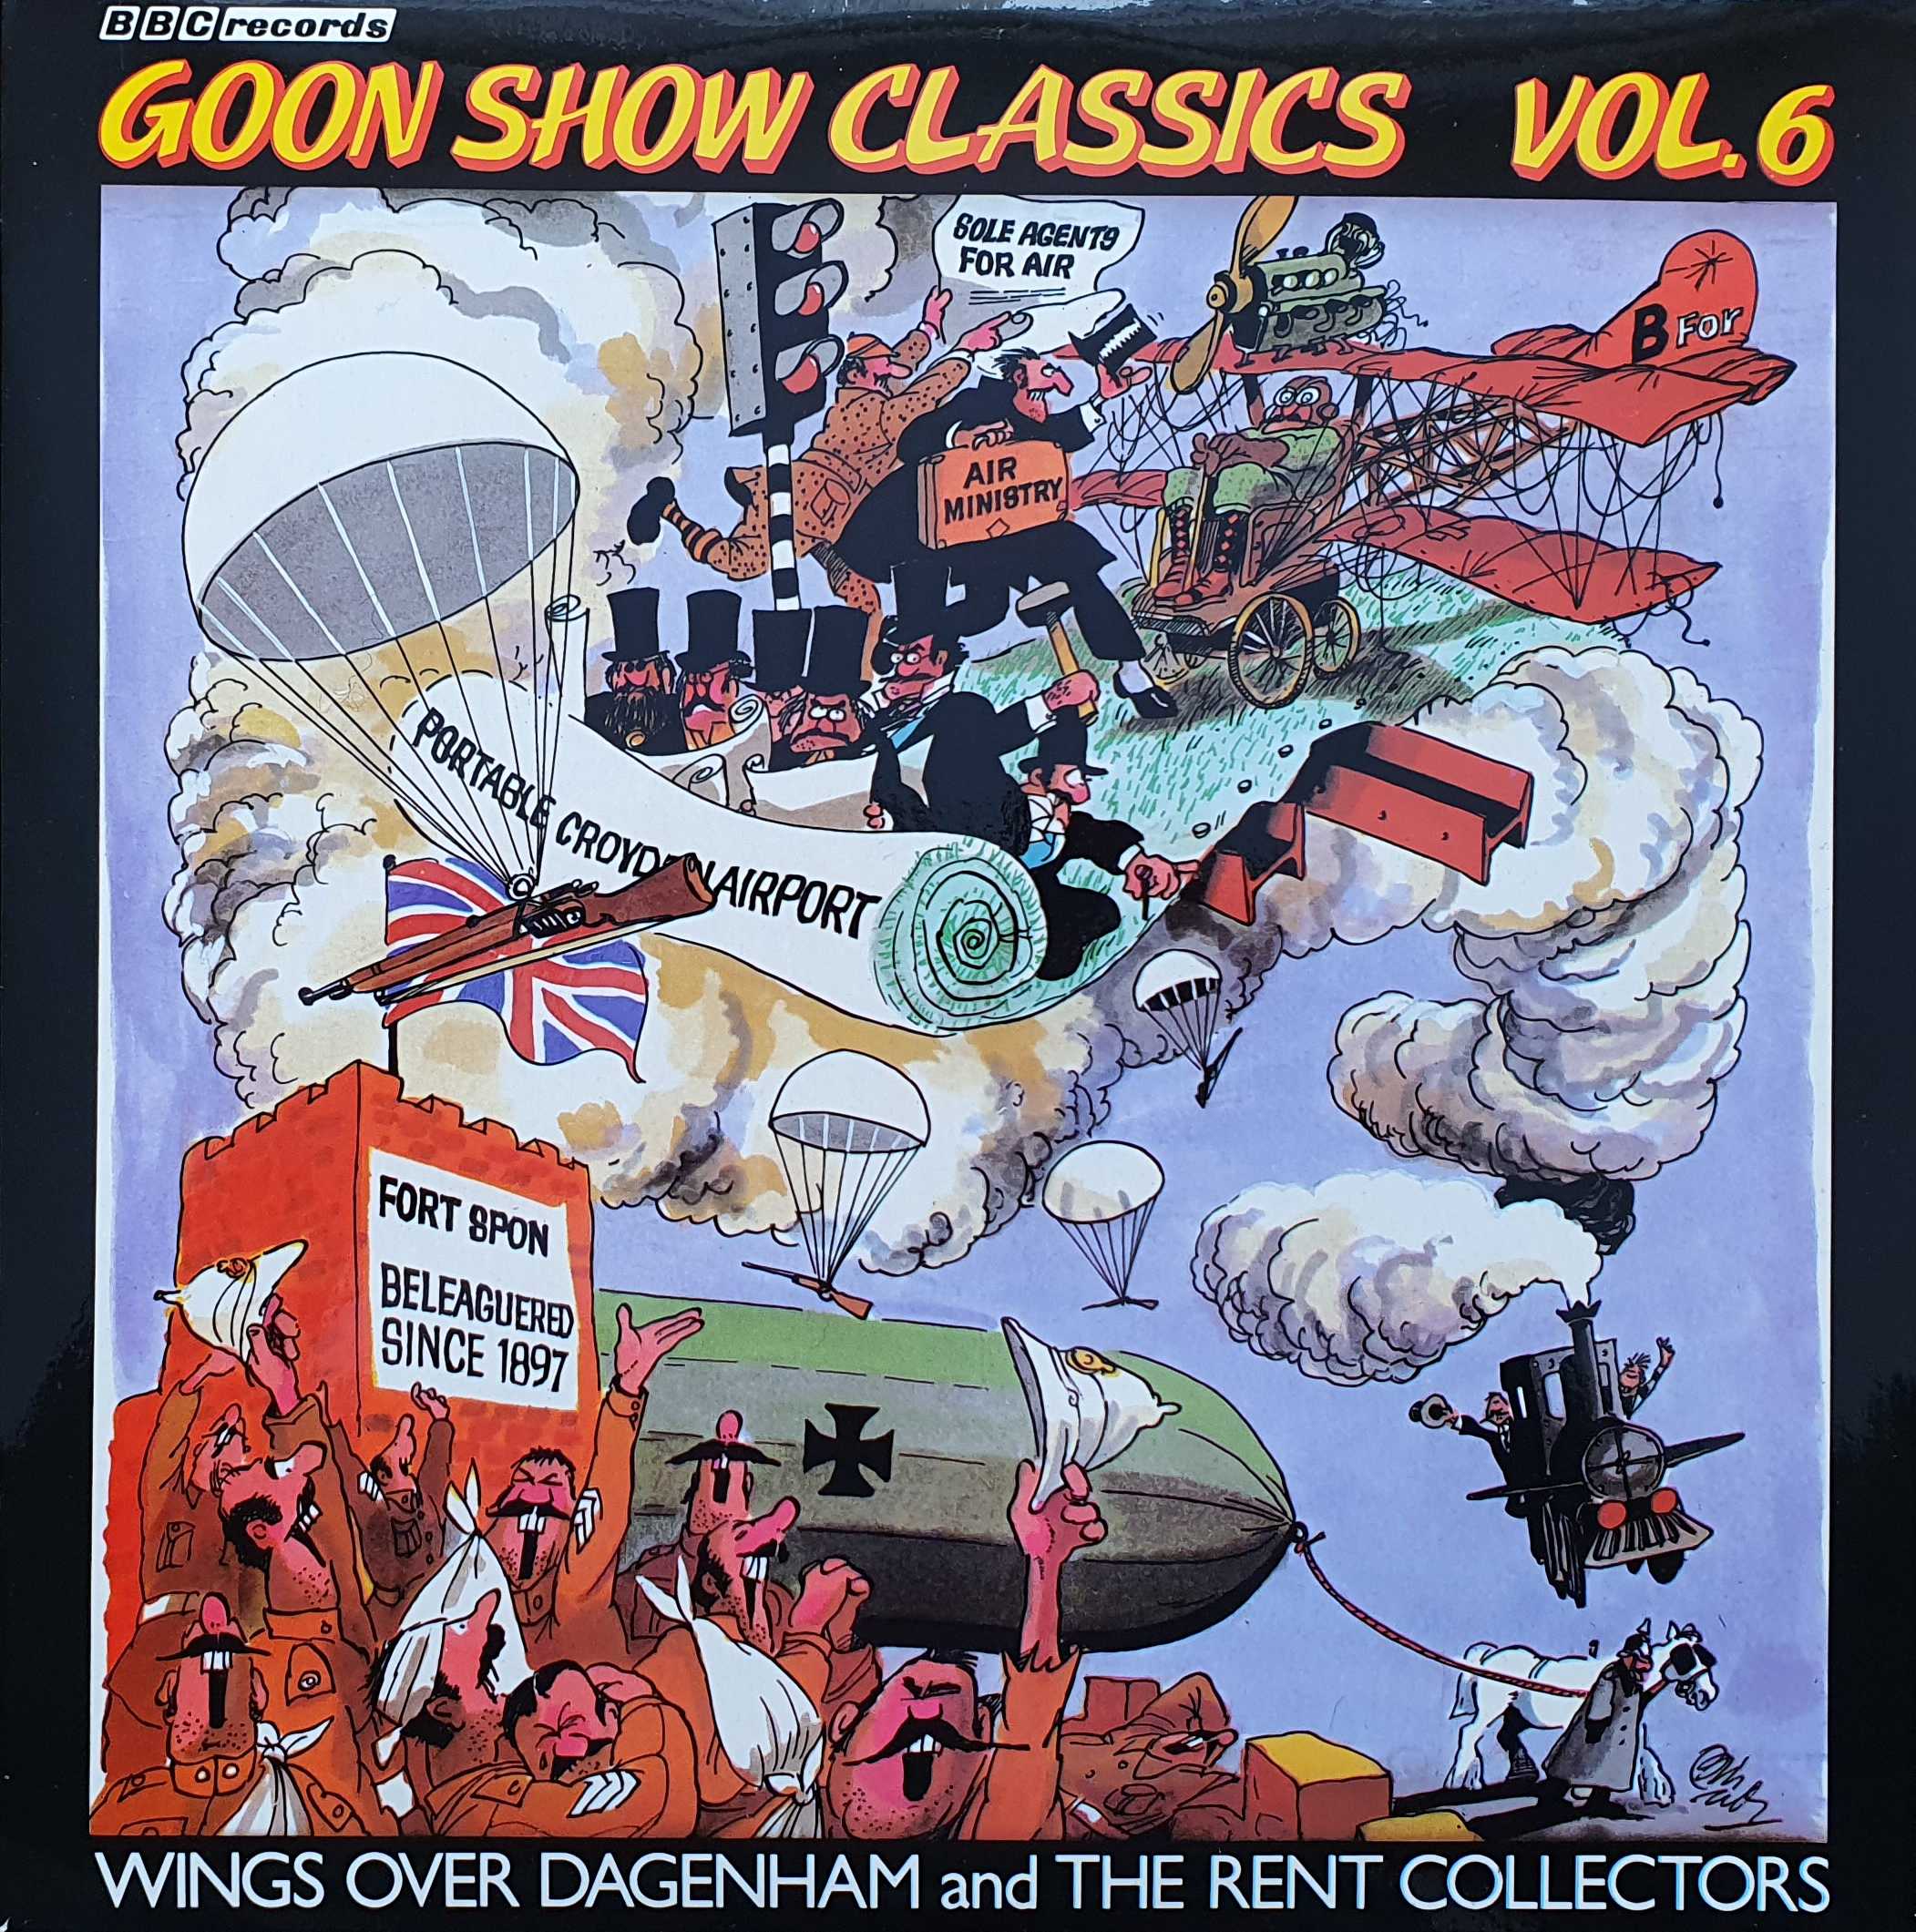 Picture of 2964 050 Goon Show classics vol. 6 by artist The Goon Show from the BBC albums - Records and Tapes library